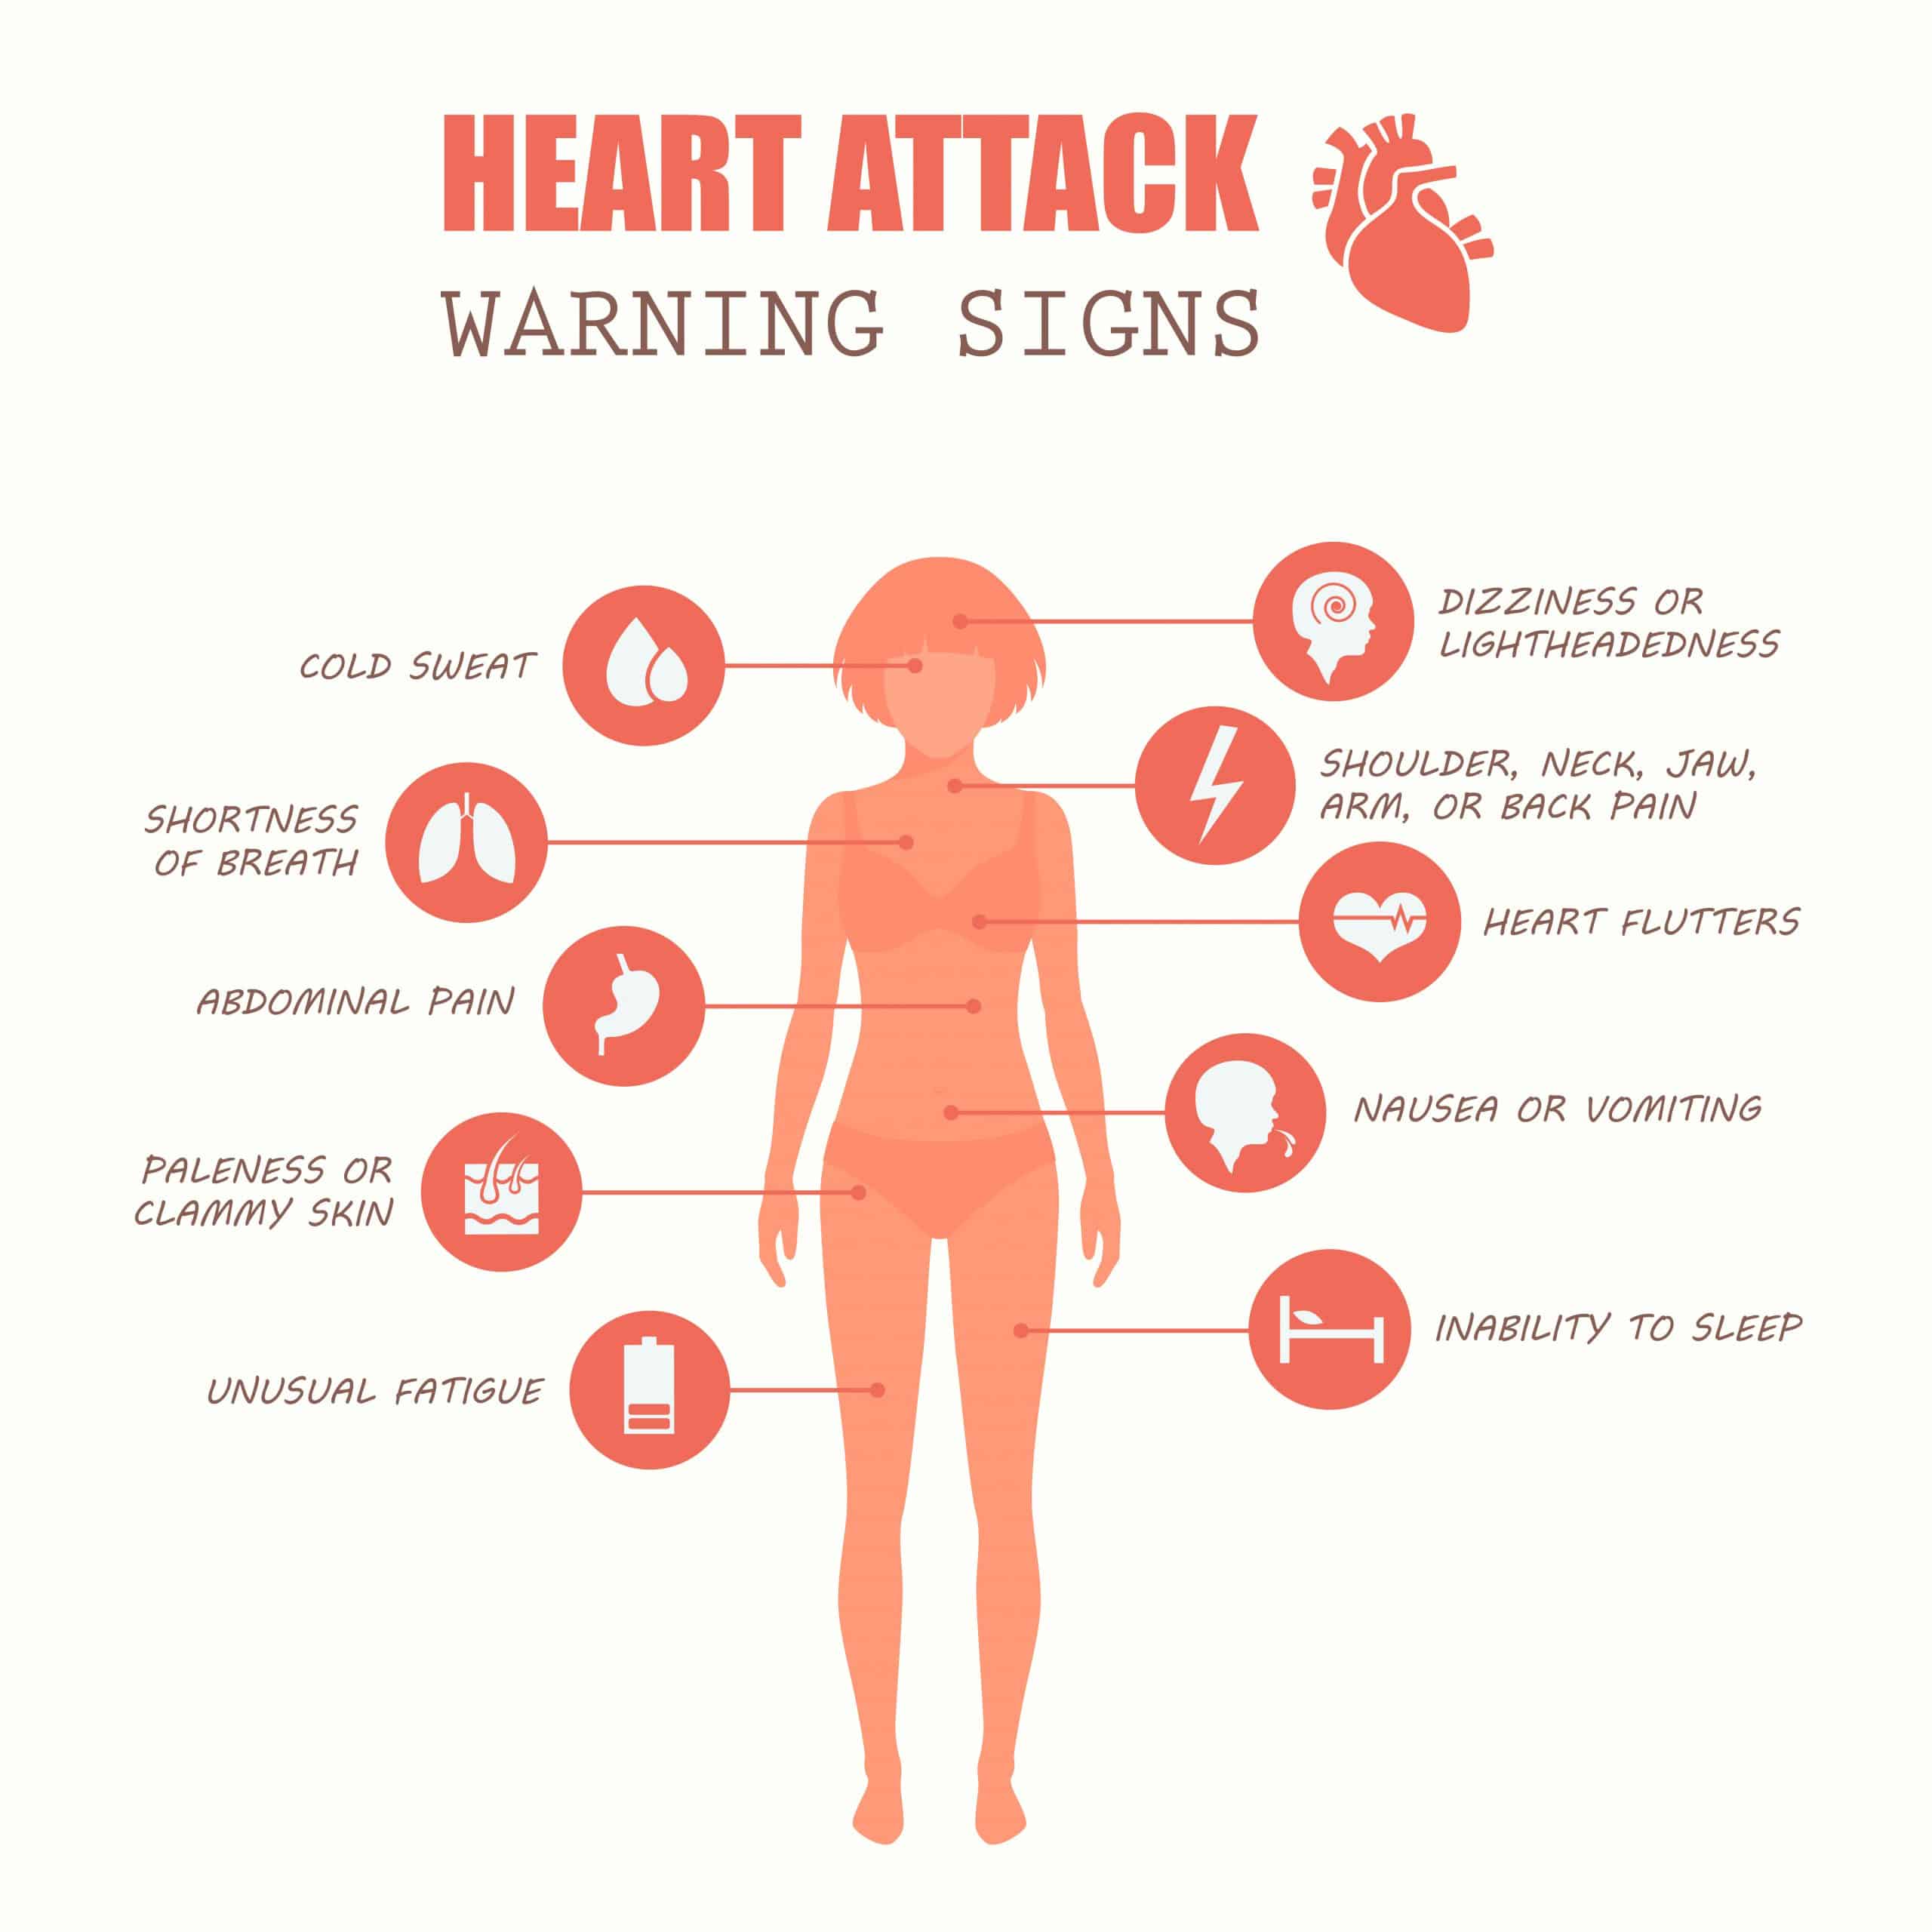 Do you know the signs of a heart attack?